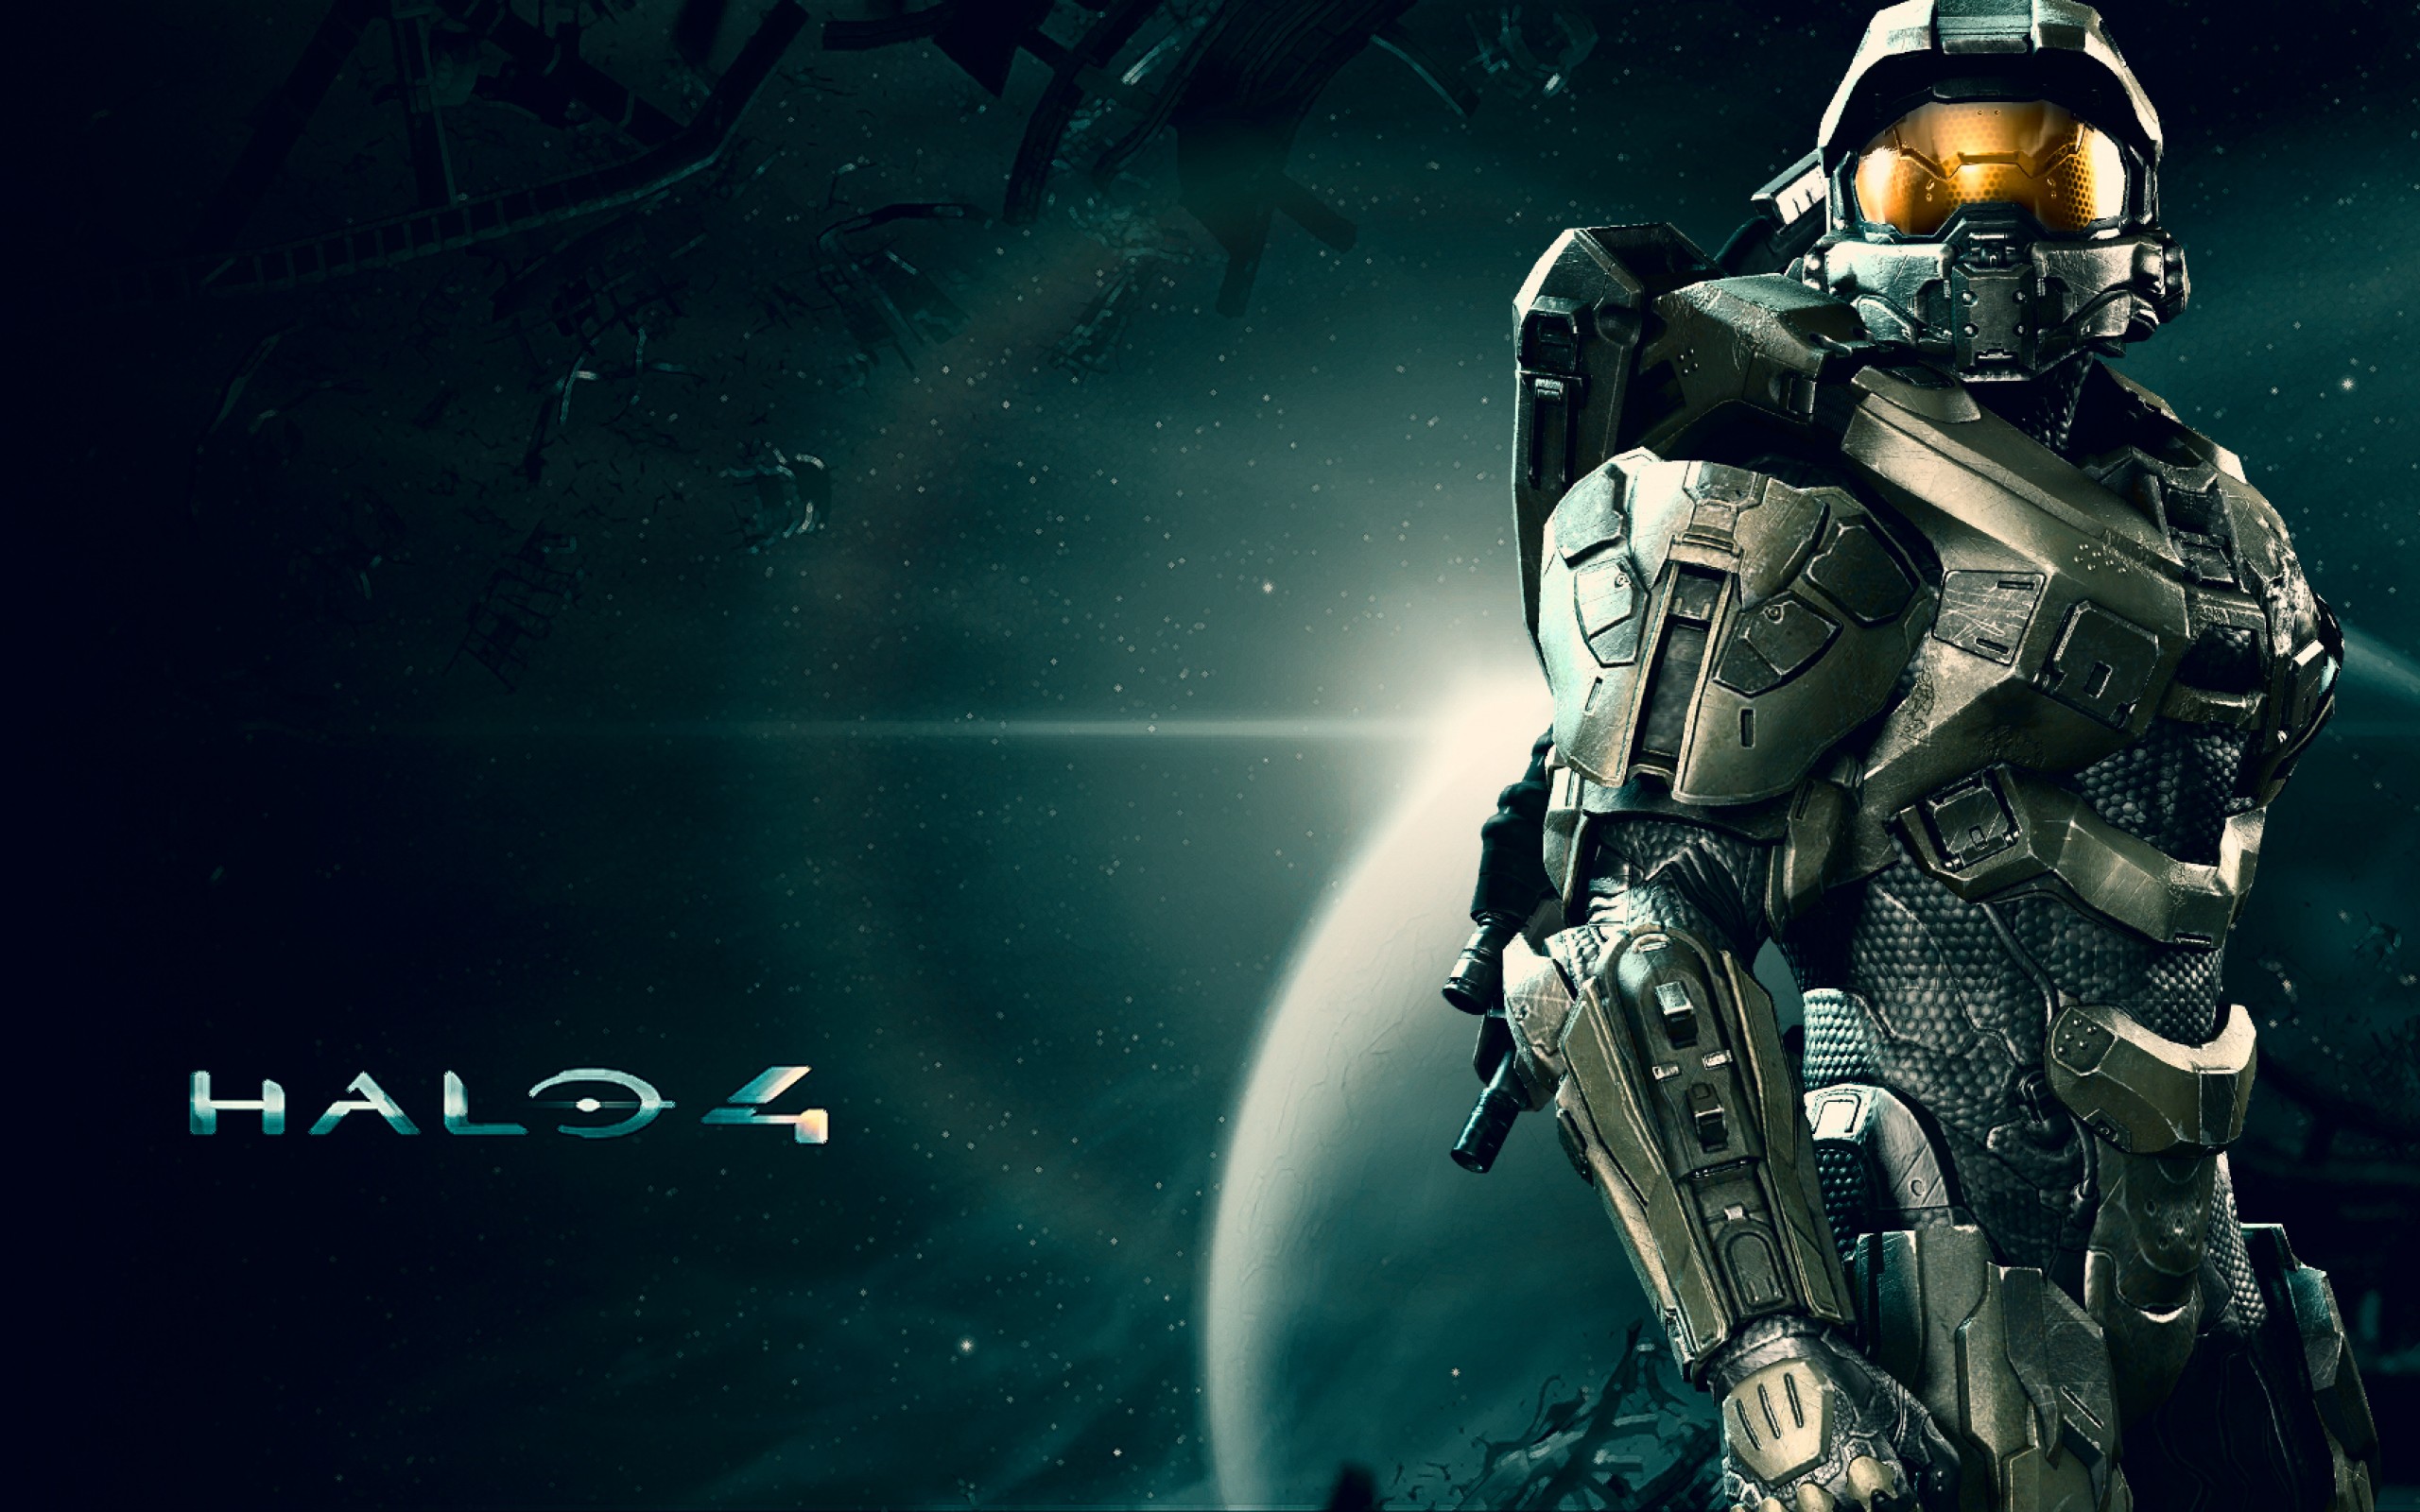 Wallpapers Images Photos pour halo wallpaper w12fr 2560x1600